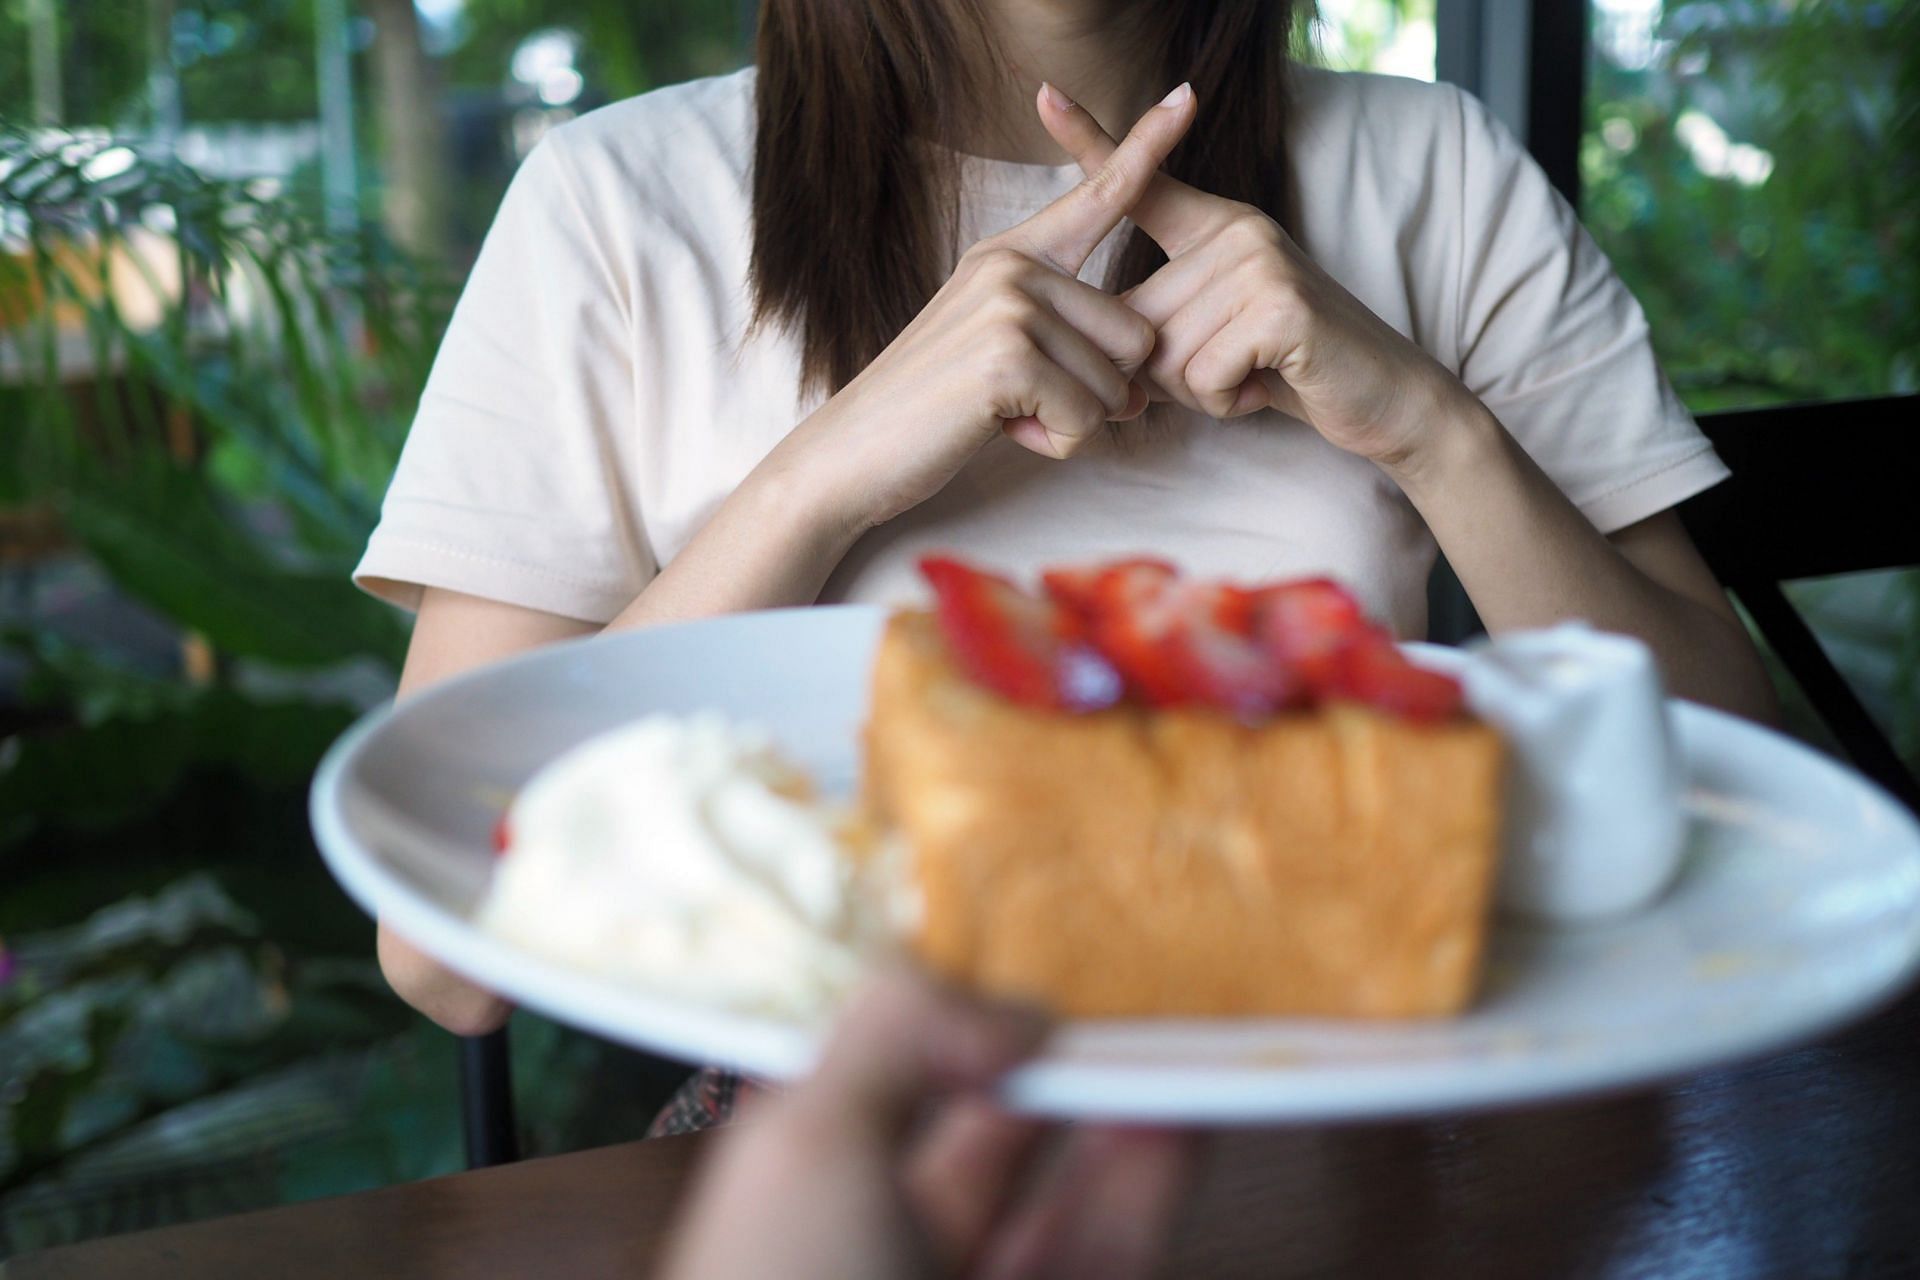 Social comparison can fuel the beliefs about your relationship with food. (Image via Vecteezy/ nuttawan jayawan)